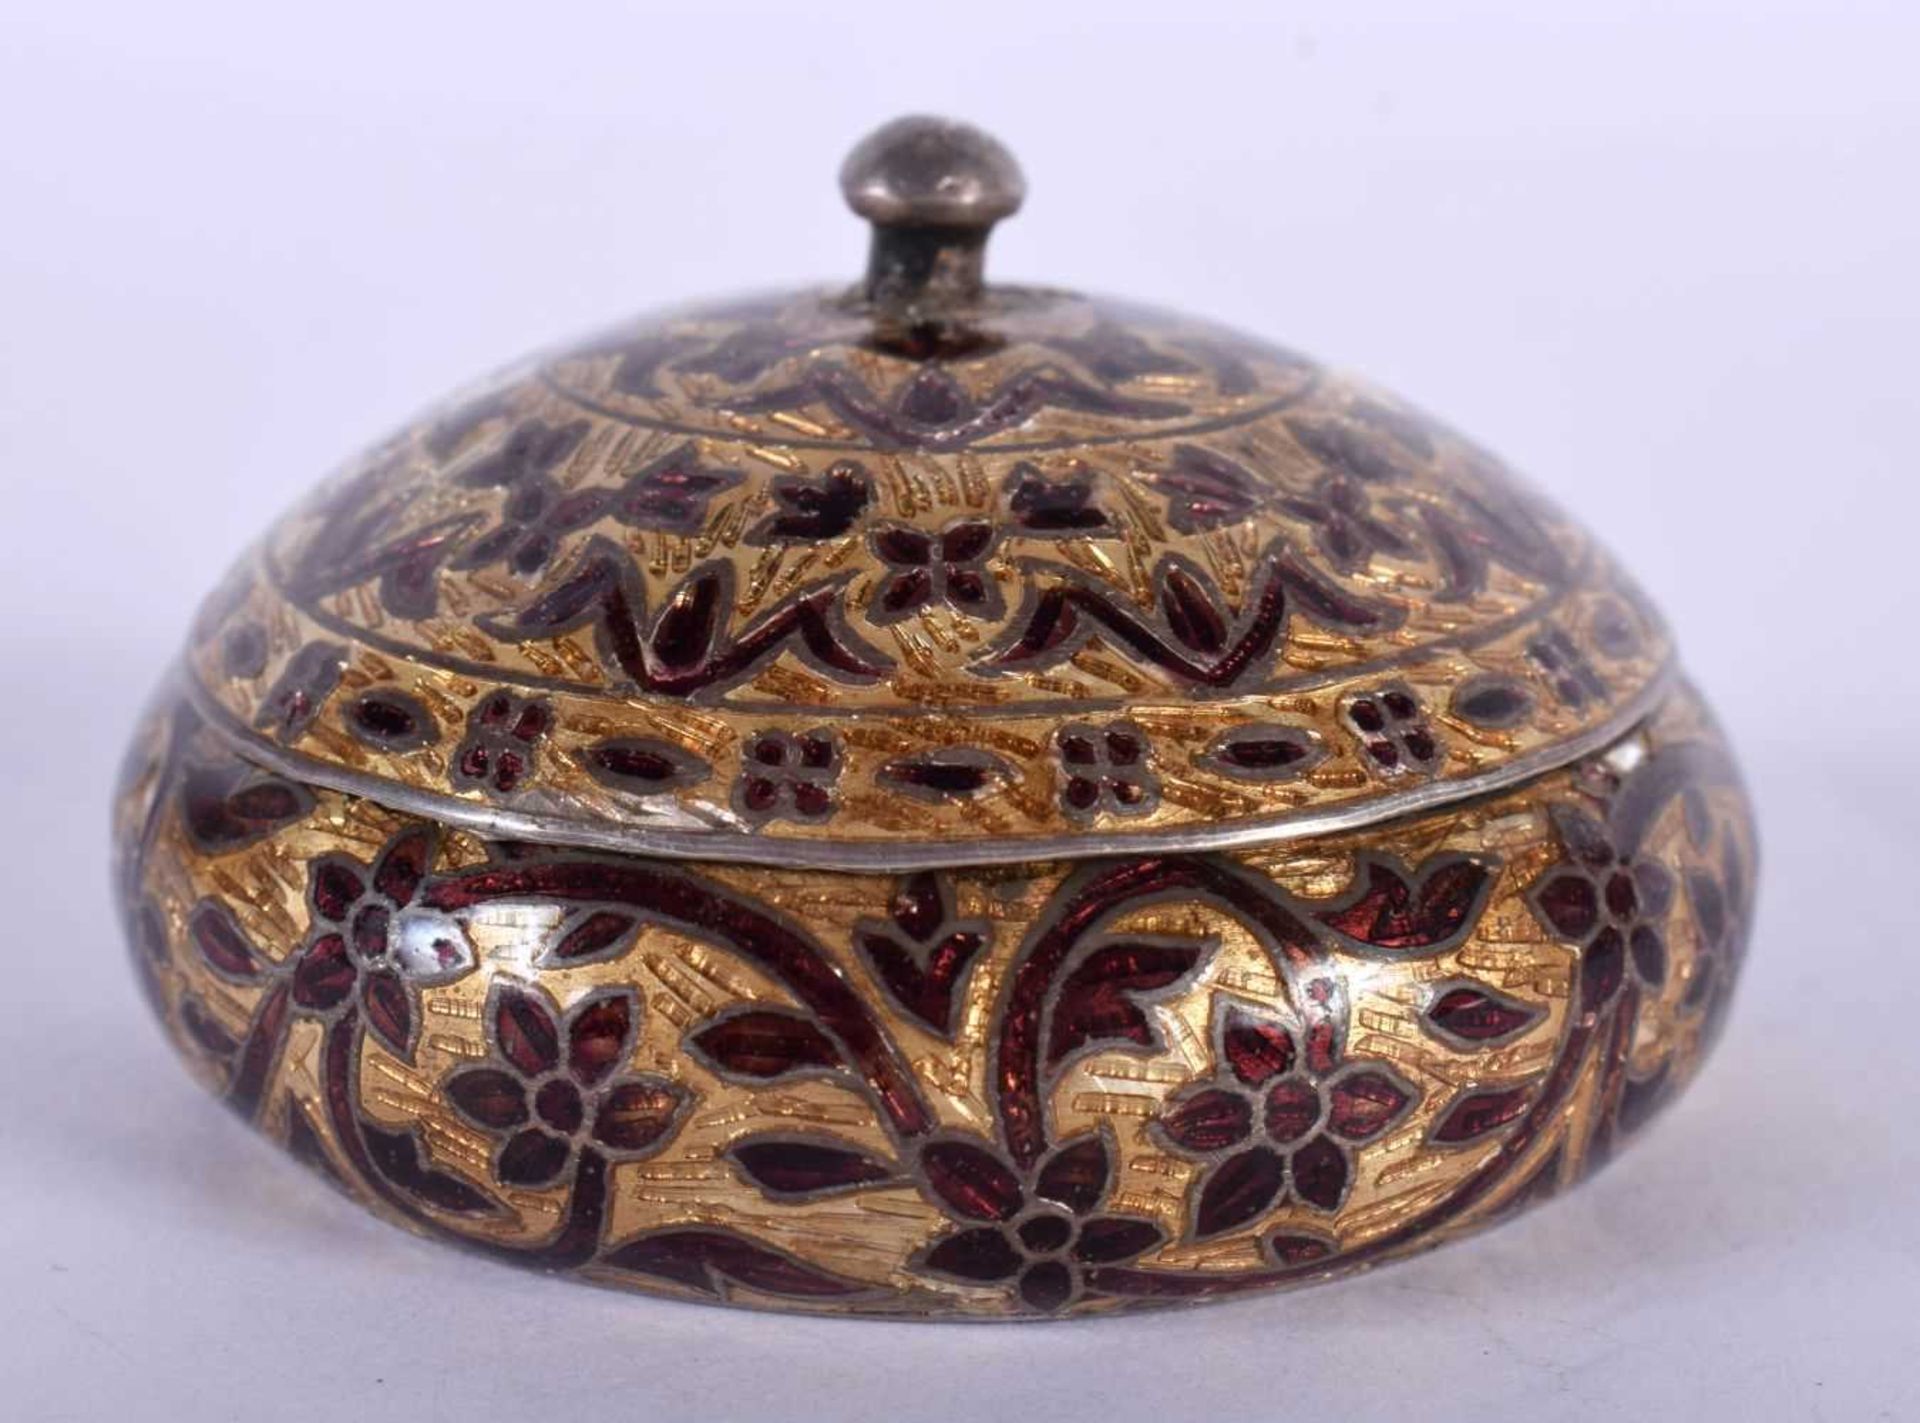 A Silver and Cloisonne Enamel Trinket Box. Stamped 925, 5.8cm x 3.5cm, weight 42g. Minor chip to